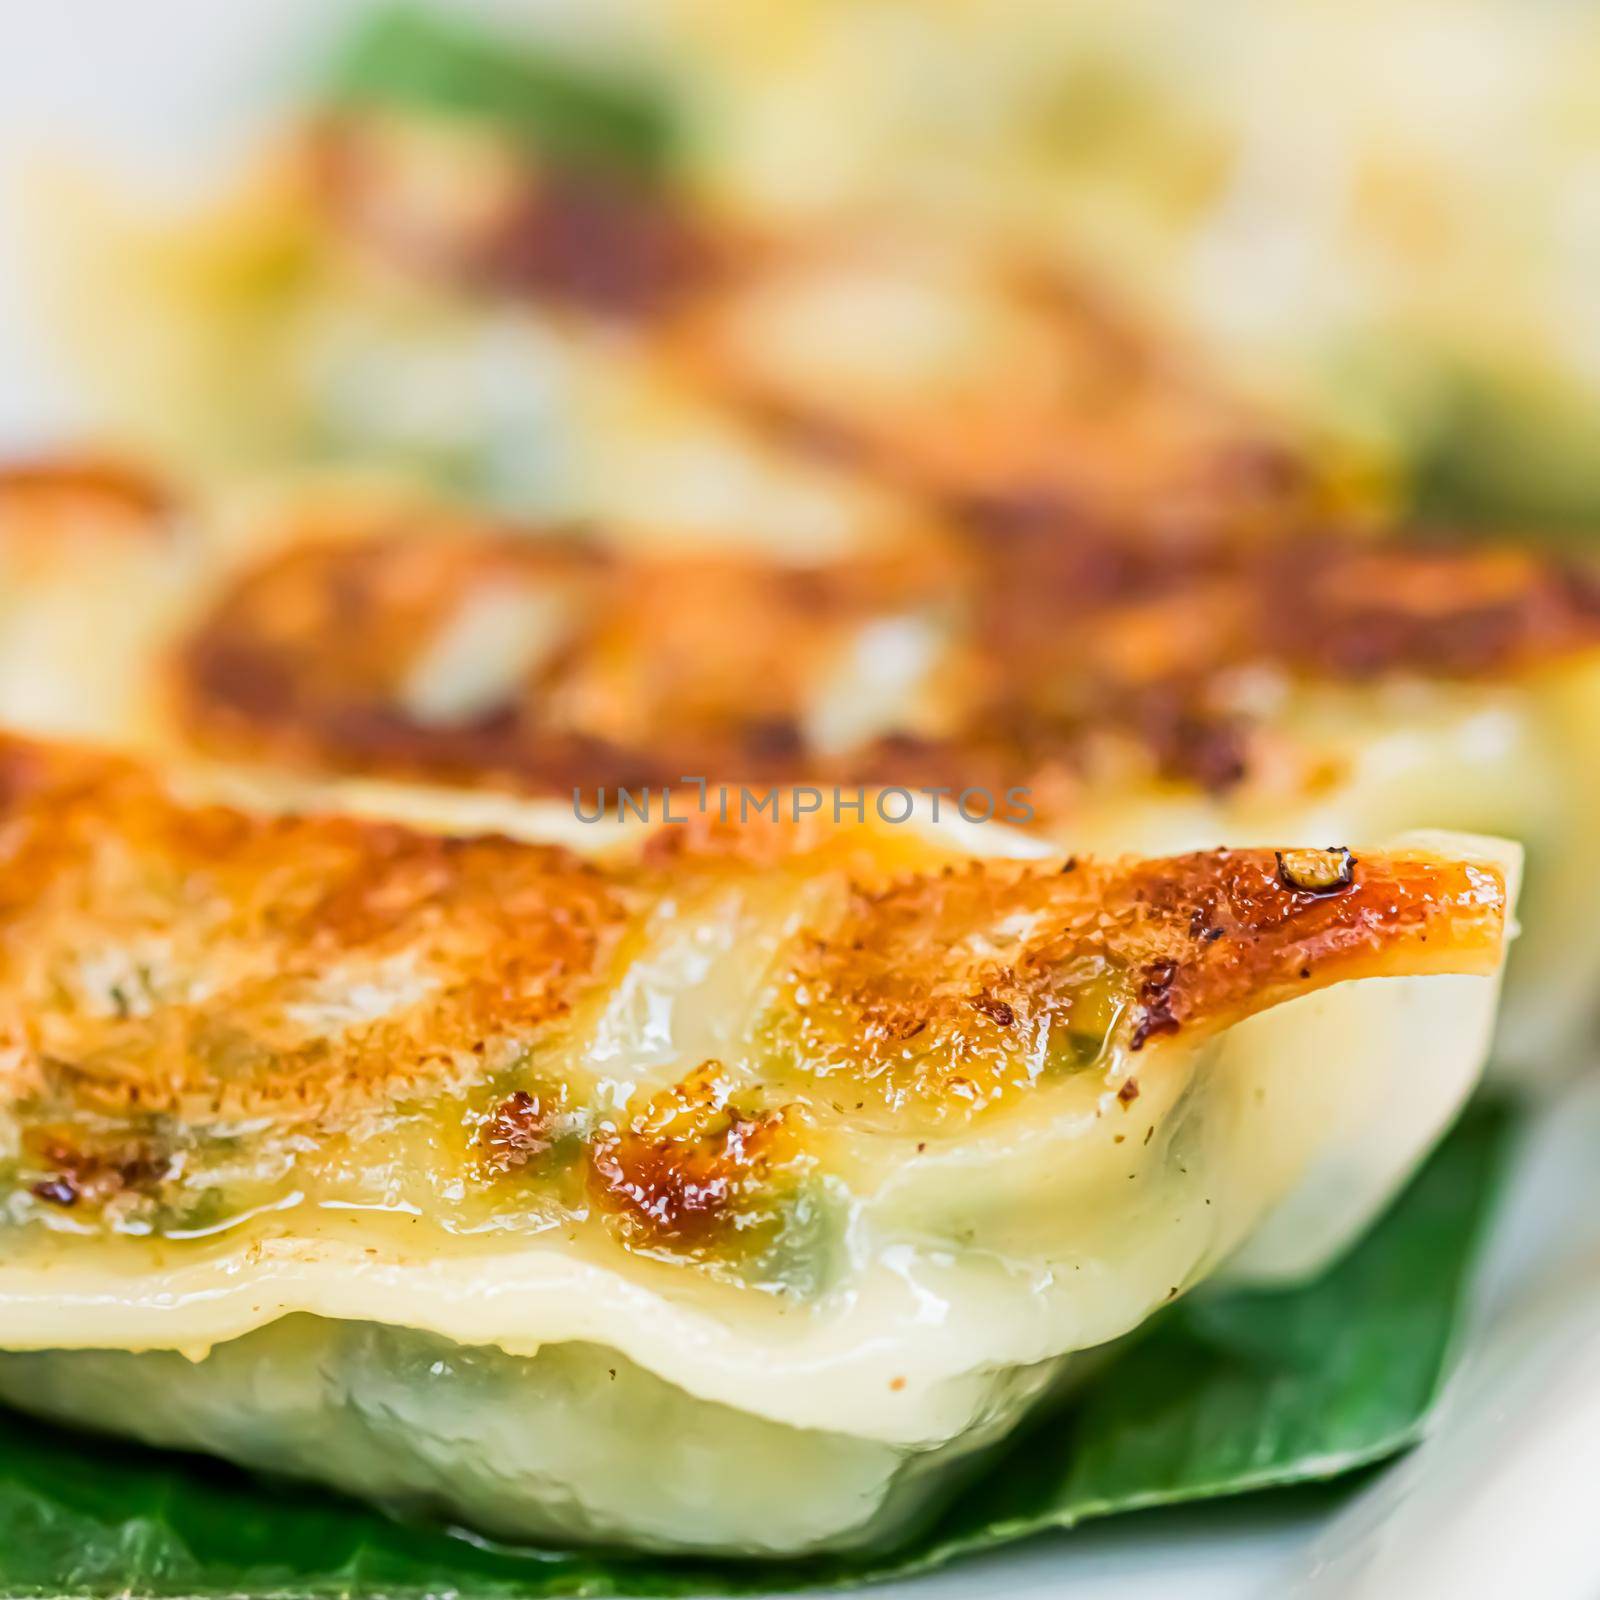 Dumplings with spinach, gyoza served as appetizer on plate in luxury asian restaurant, japanese food and vegetarian menu concept by Anneleven